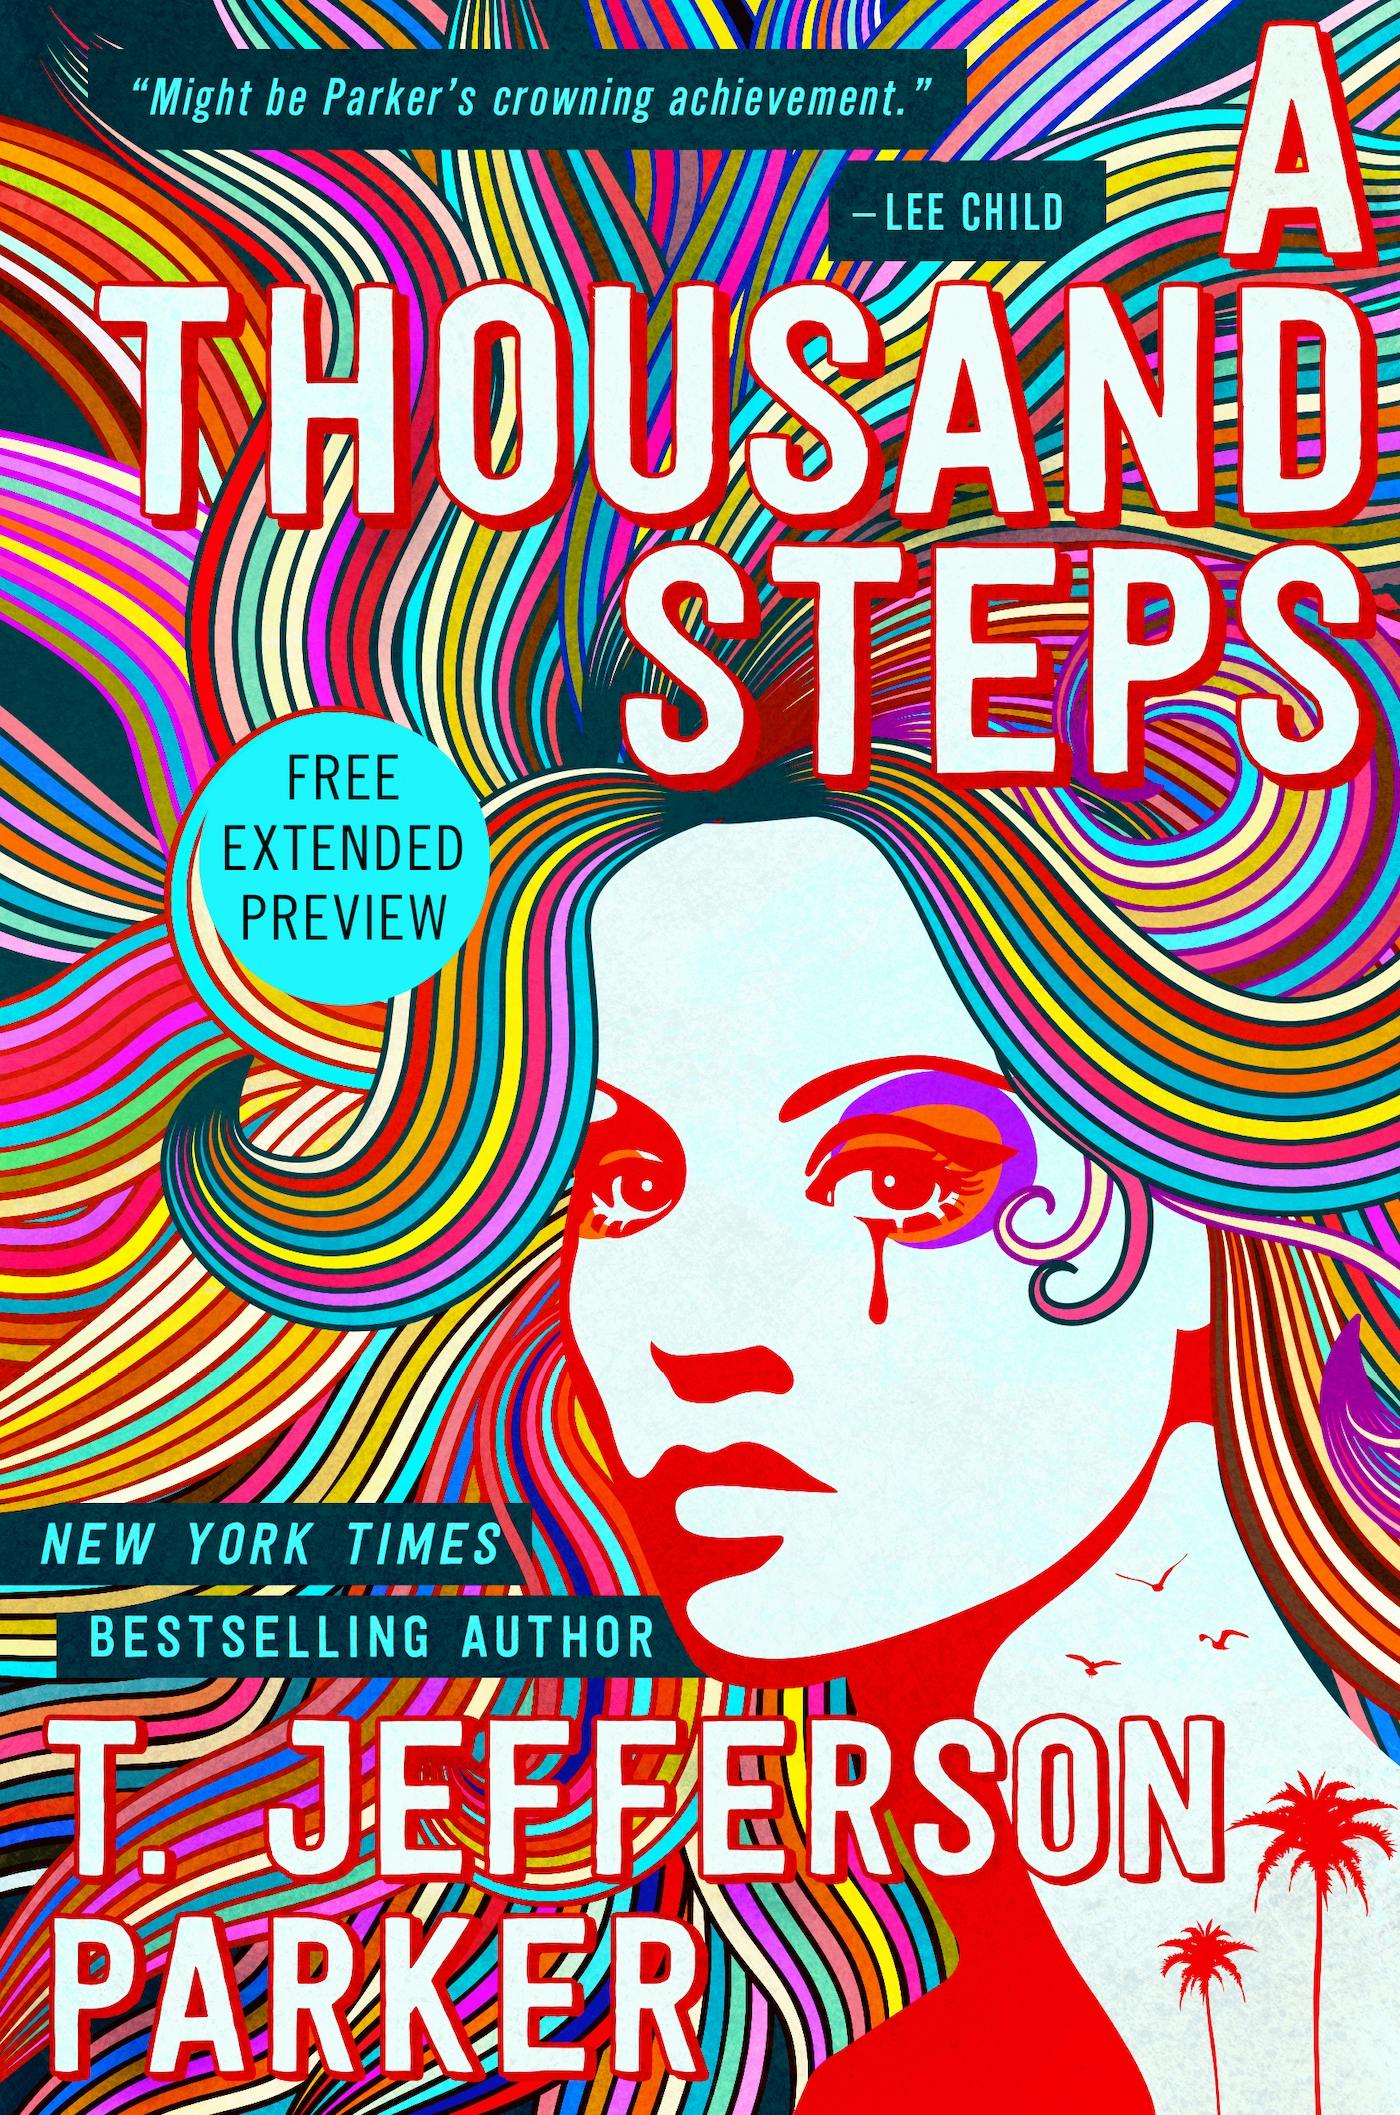 Cover for the book titled as: A Thousand Steps Sneak Peek